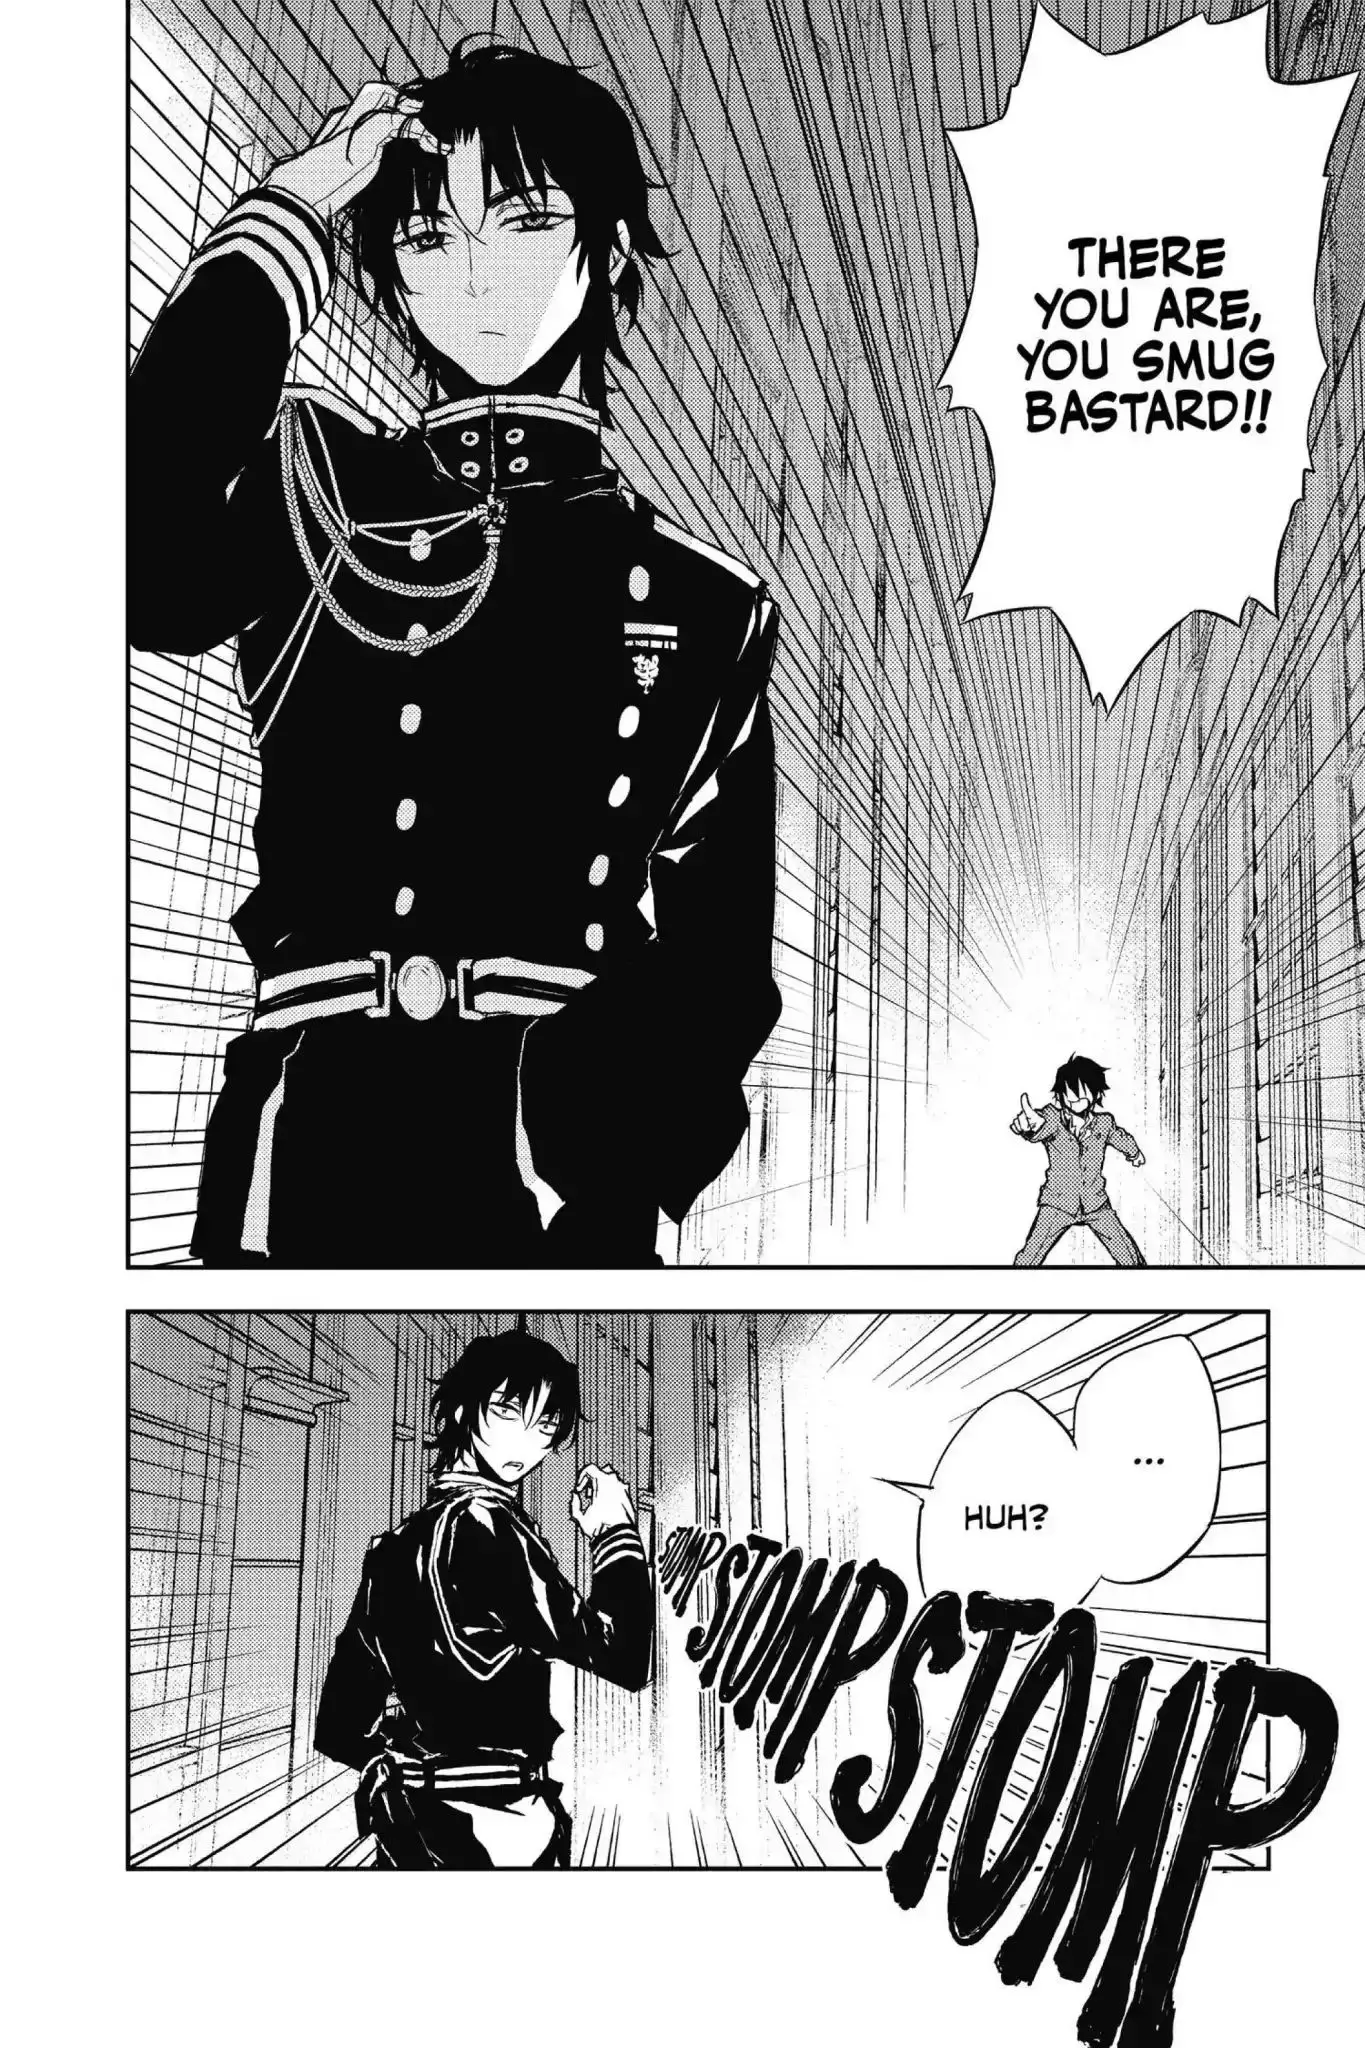 Seraph Of The End - 5 page 40-7e8760d7